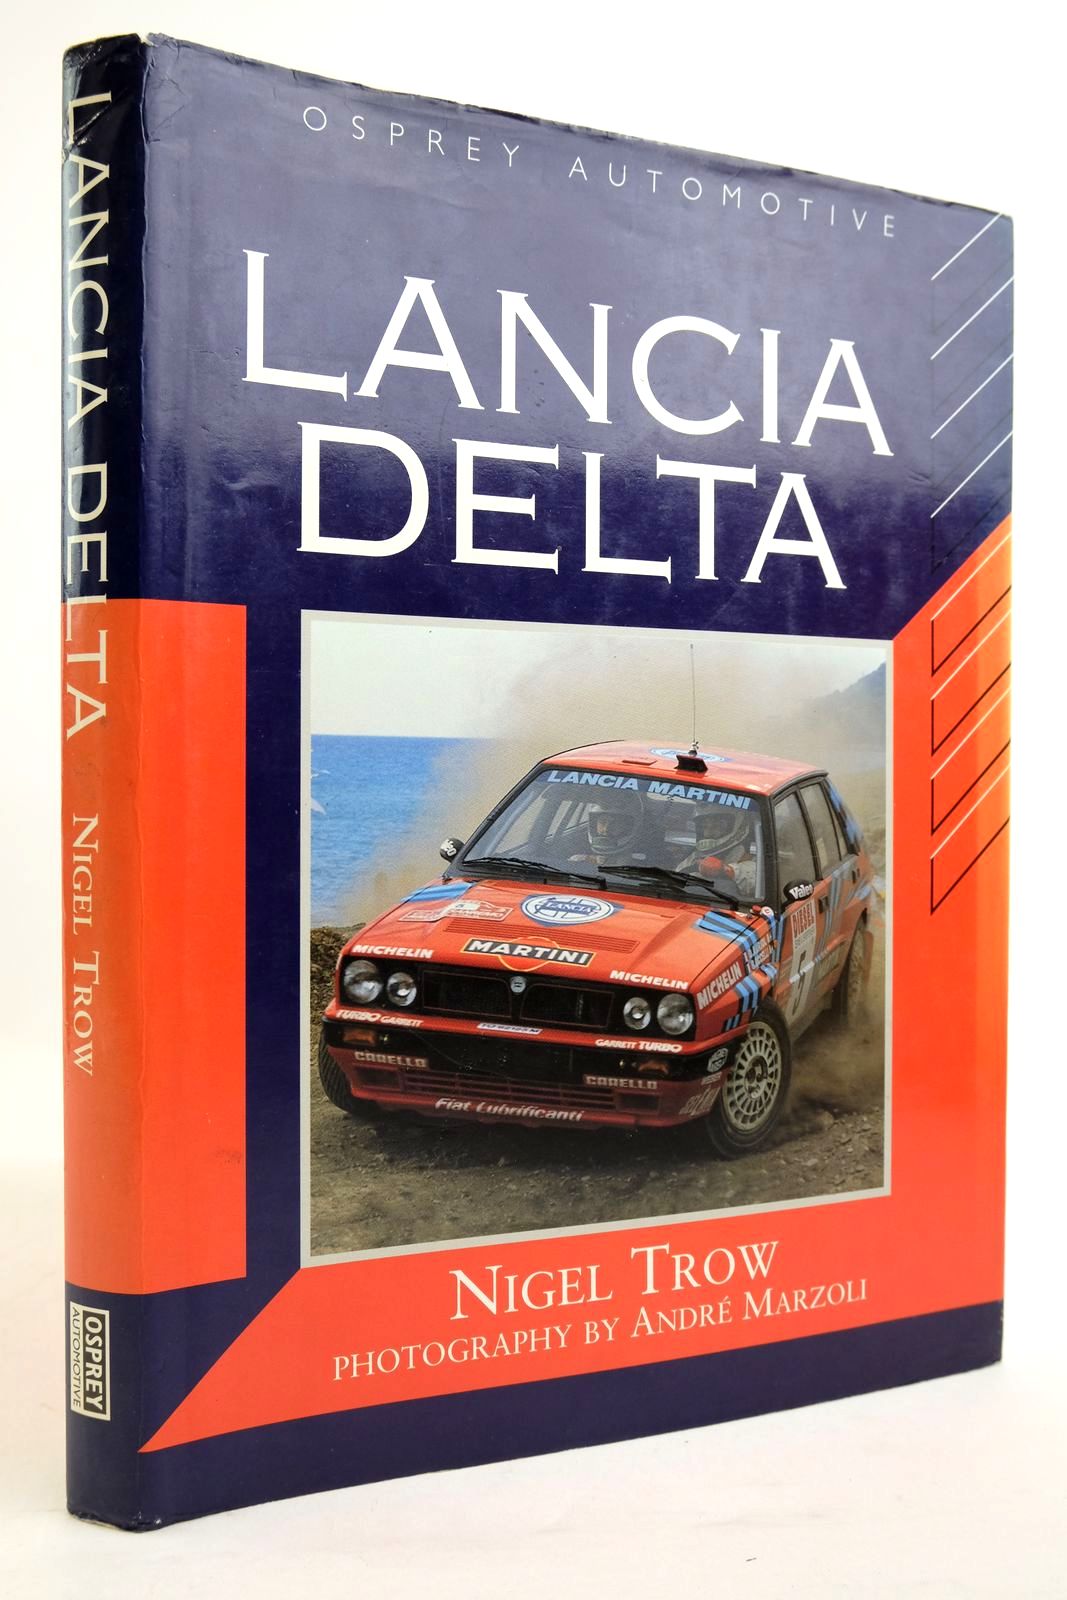 Photo of LANCIA DELTA written by Trow, Nigel published by Osprey Automotive (STOCK CODE: 2134890)  for sale by Stella & Rose's Books